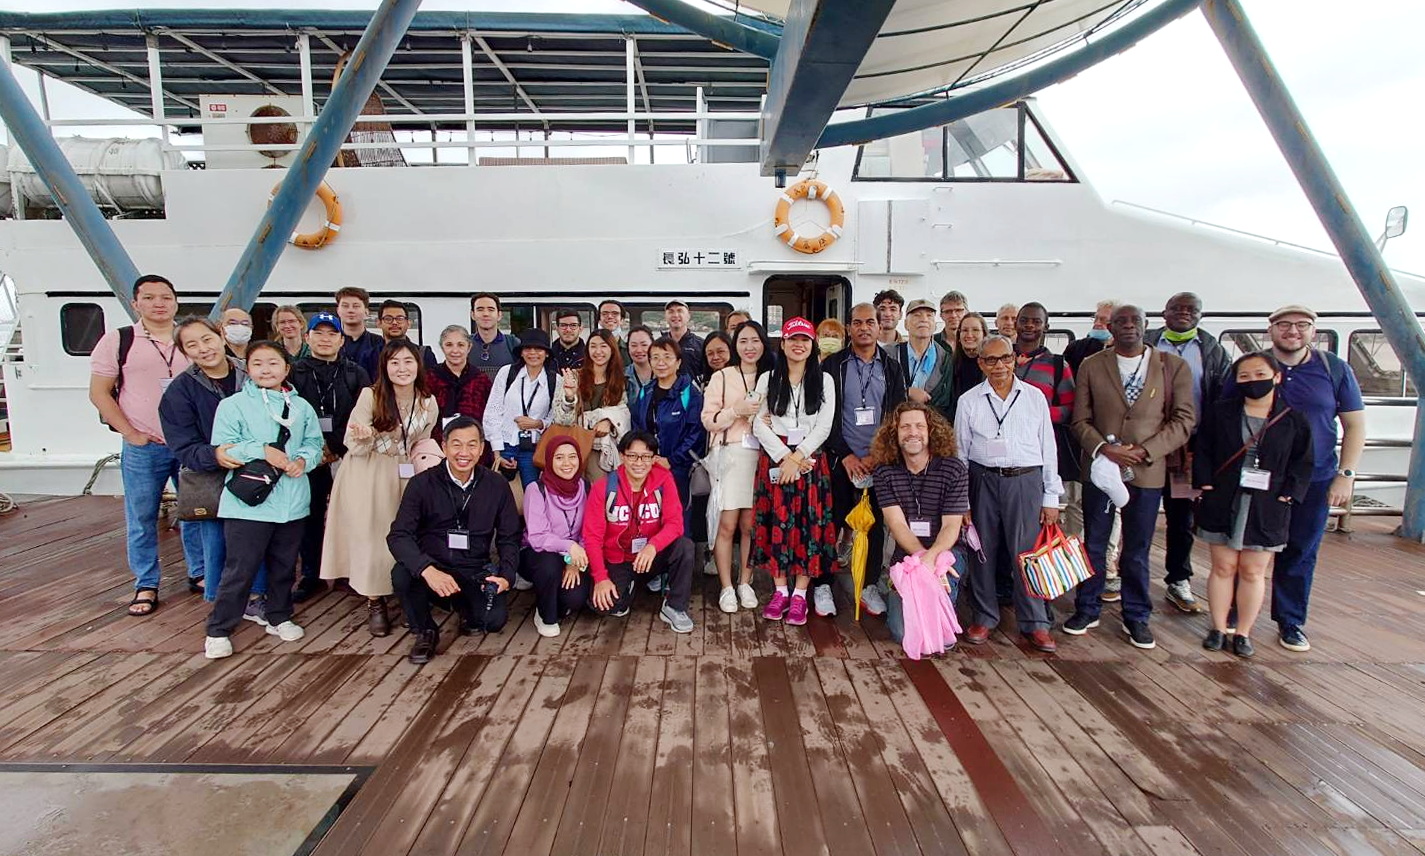 Link: 2022 Cultural Trip to Tamsui River and Dadaocheng District